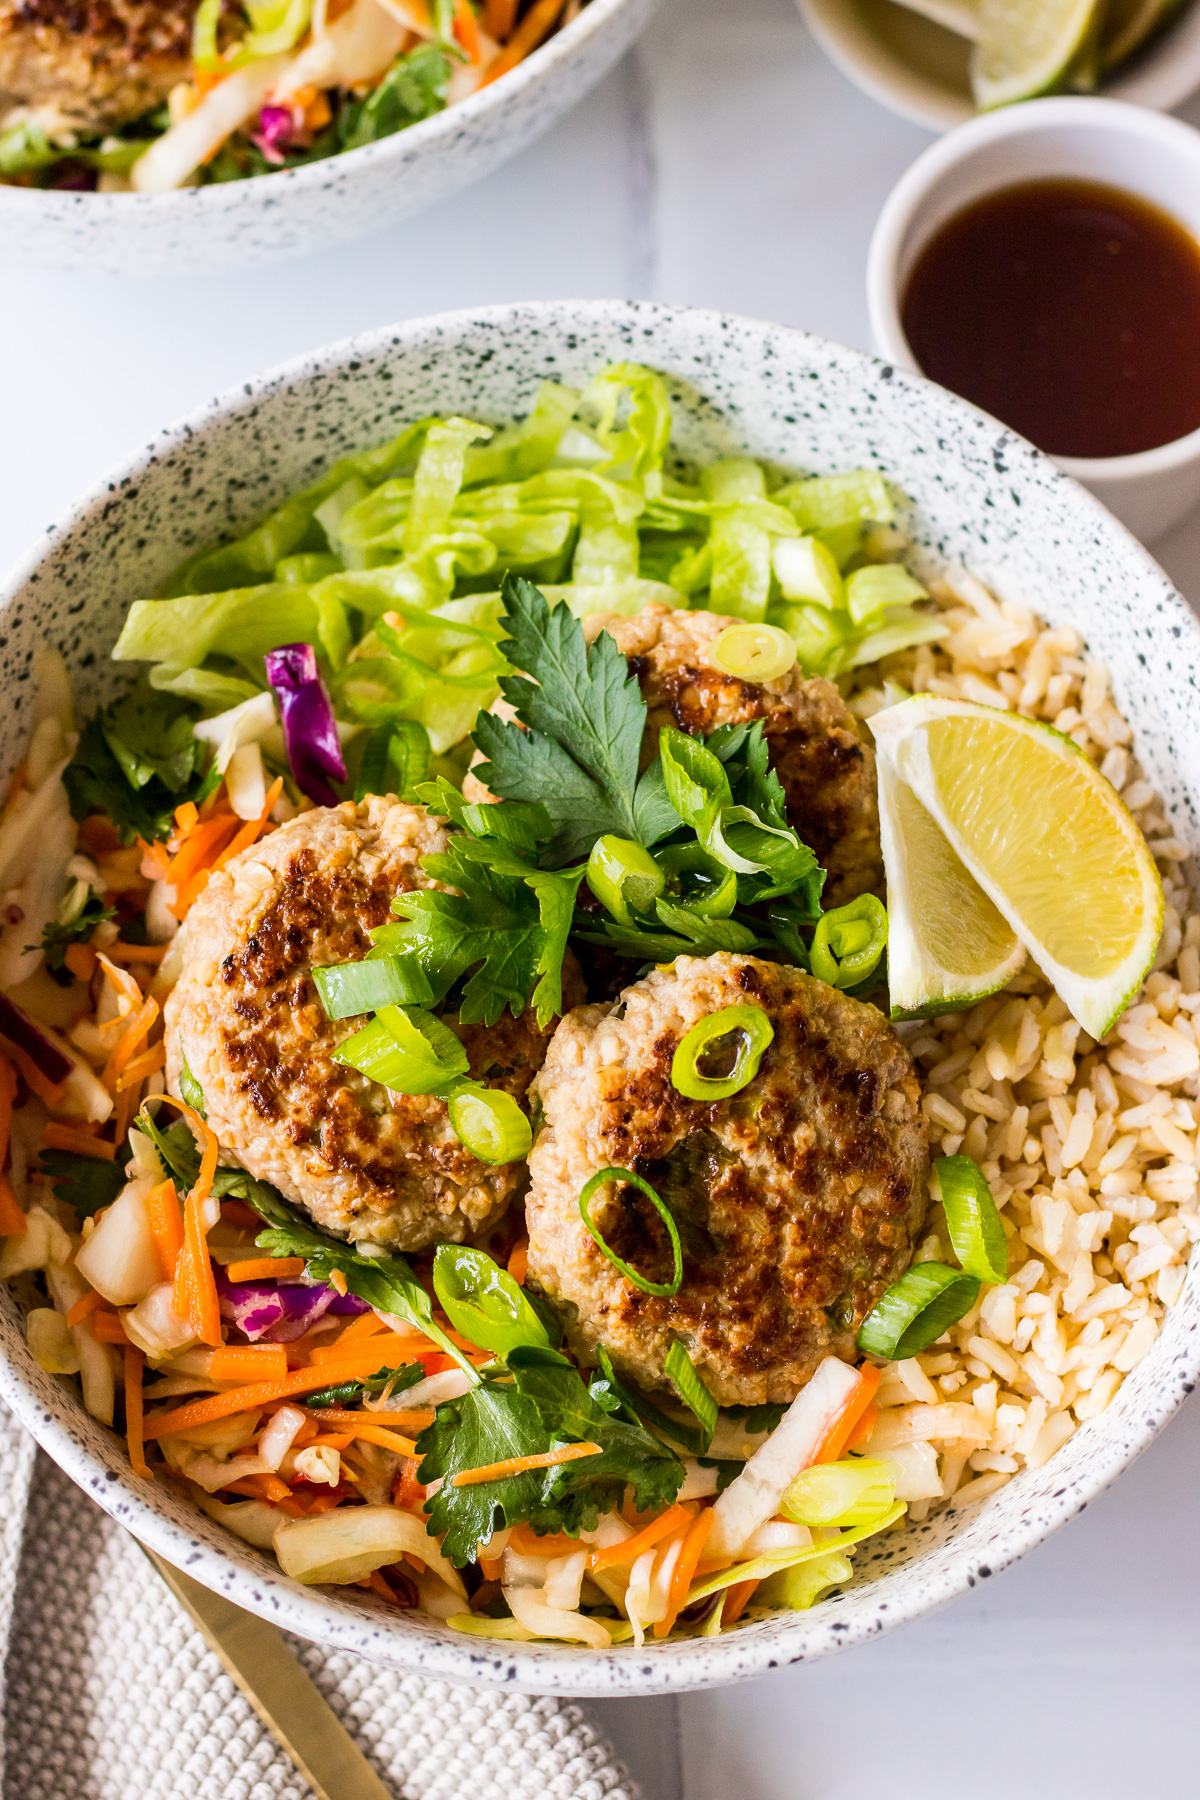 Lemongrass and ginger pork patties with spring onion, fresh salad, brown rice and soy dressing